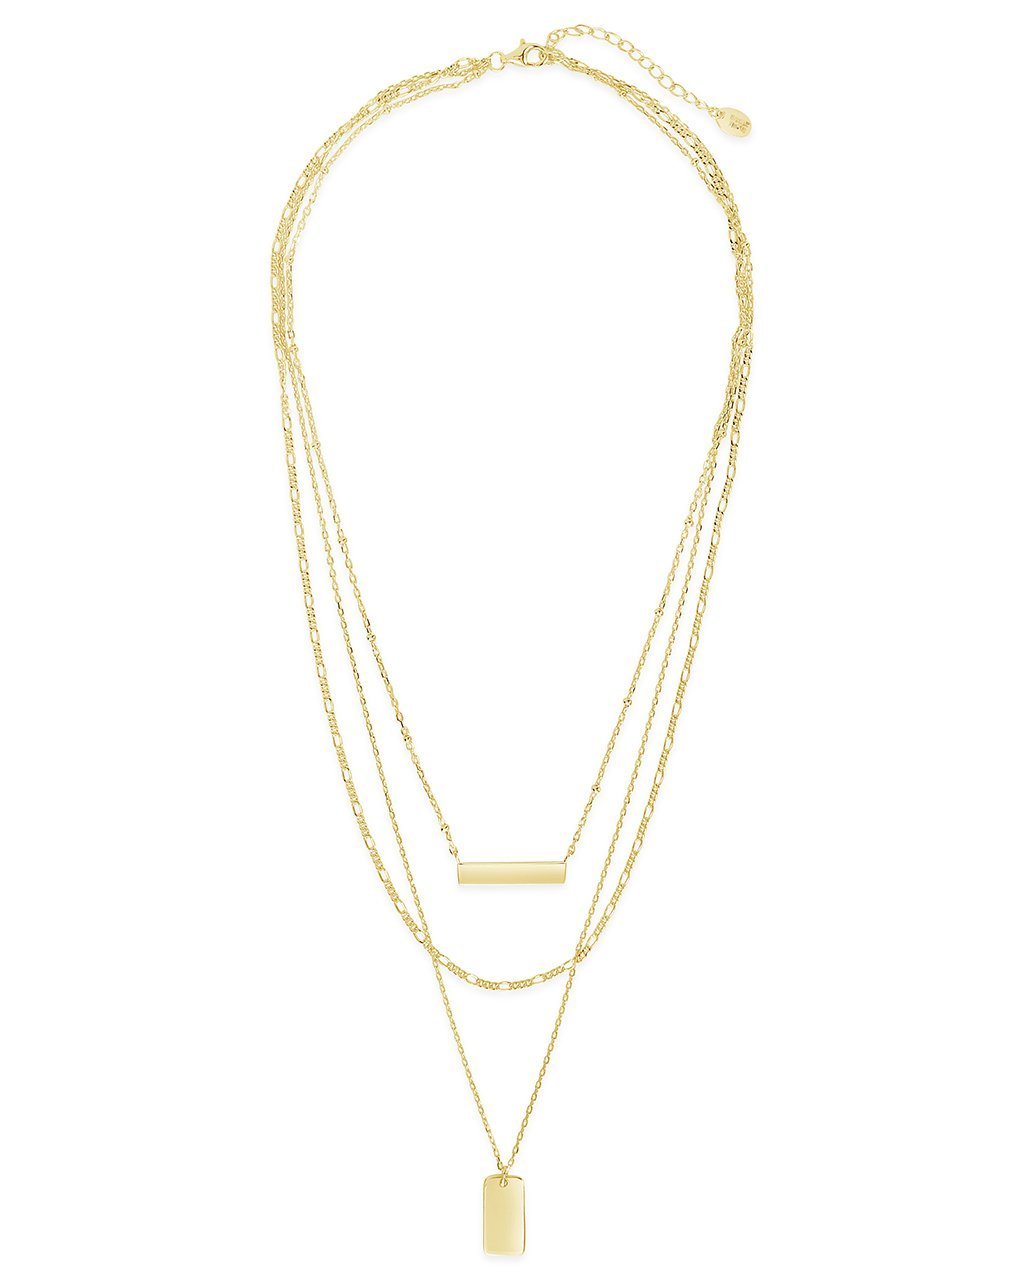 Triple Layered Bar Necklace - Sterling Forever